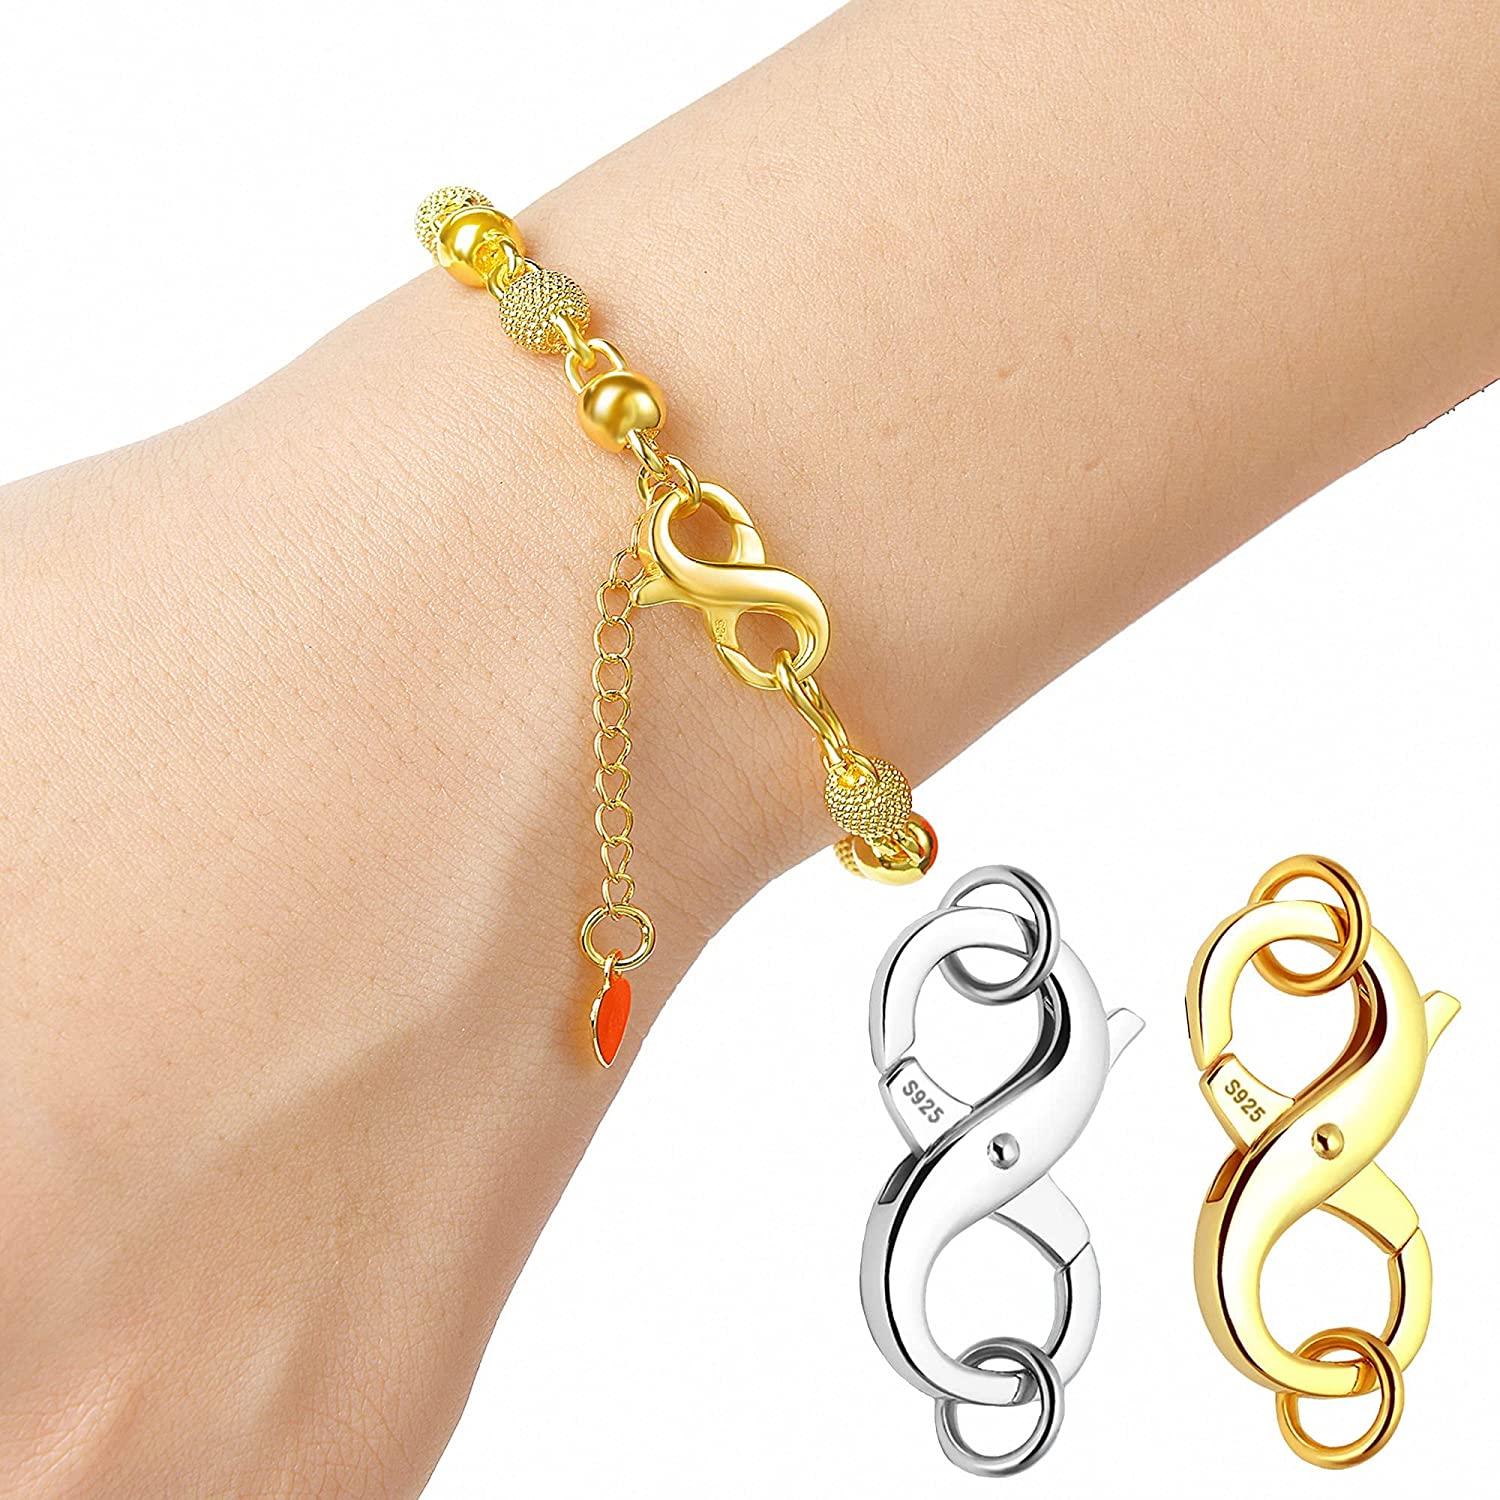 INFINITY CLIPS - Necklace Chain Shortener